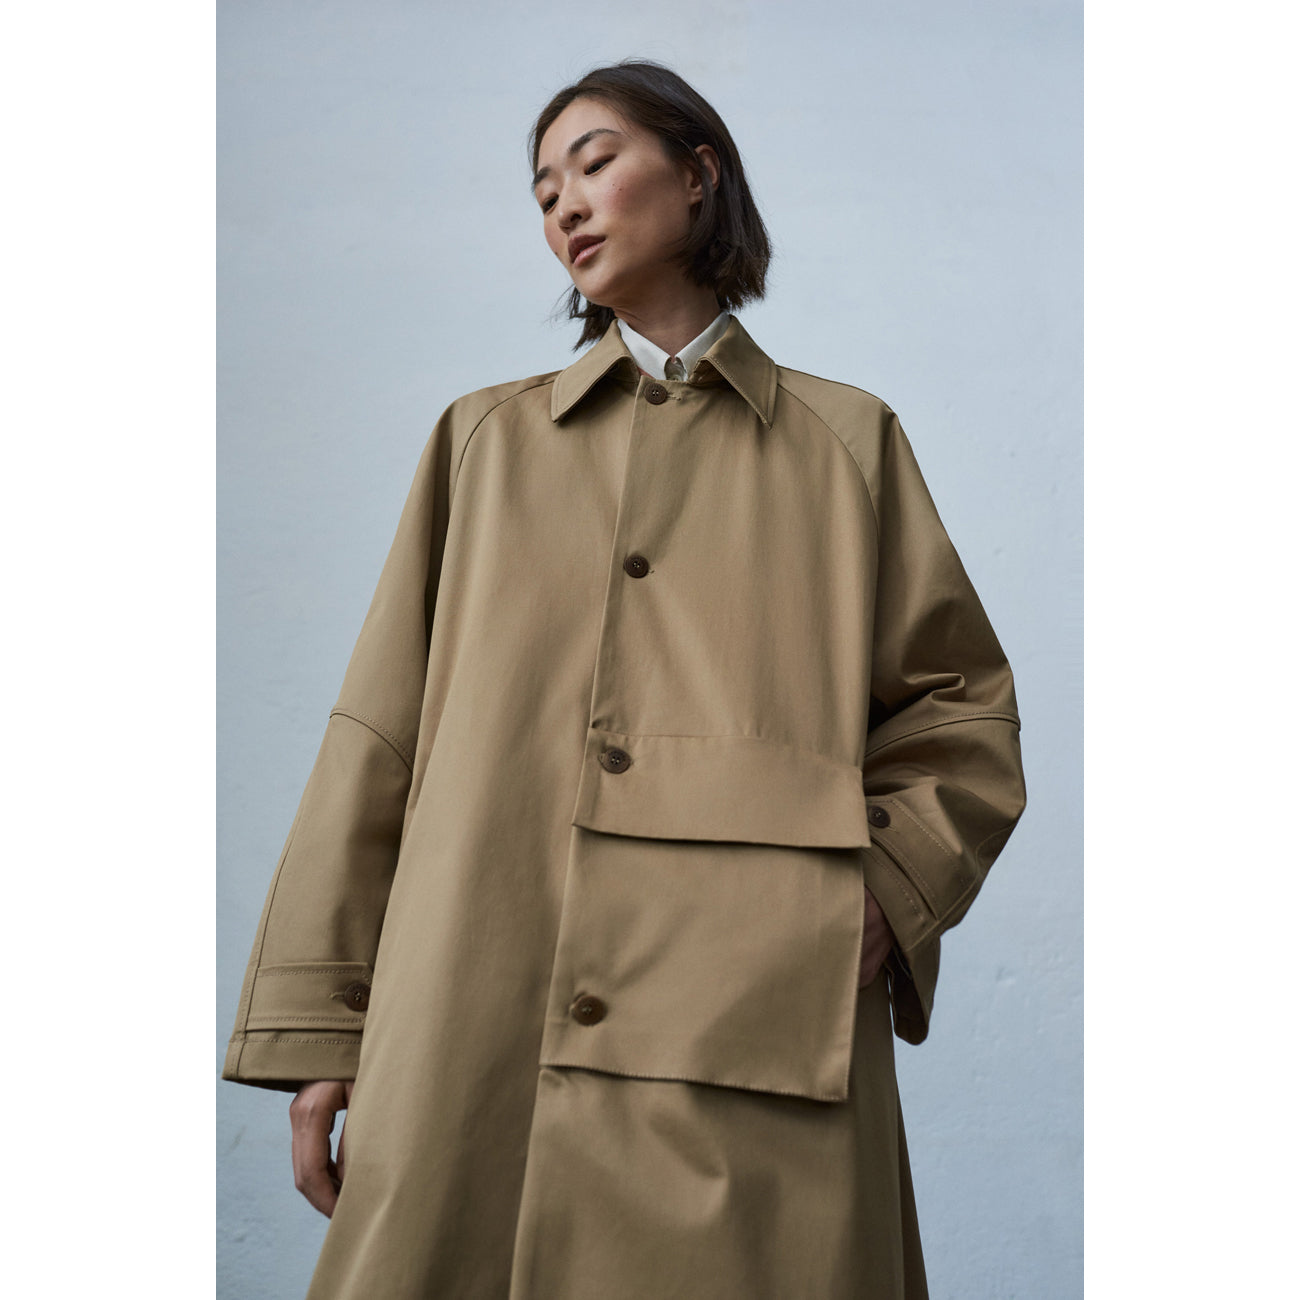 front pocket trench in camel